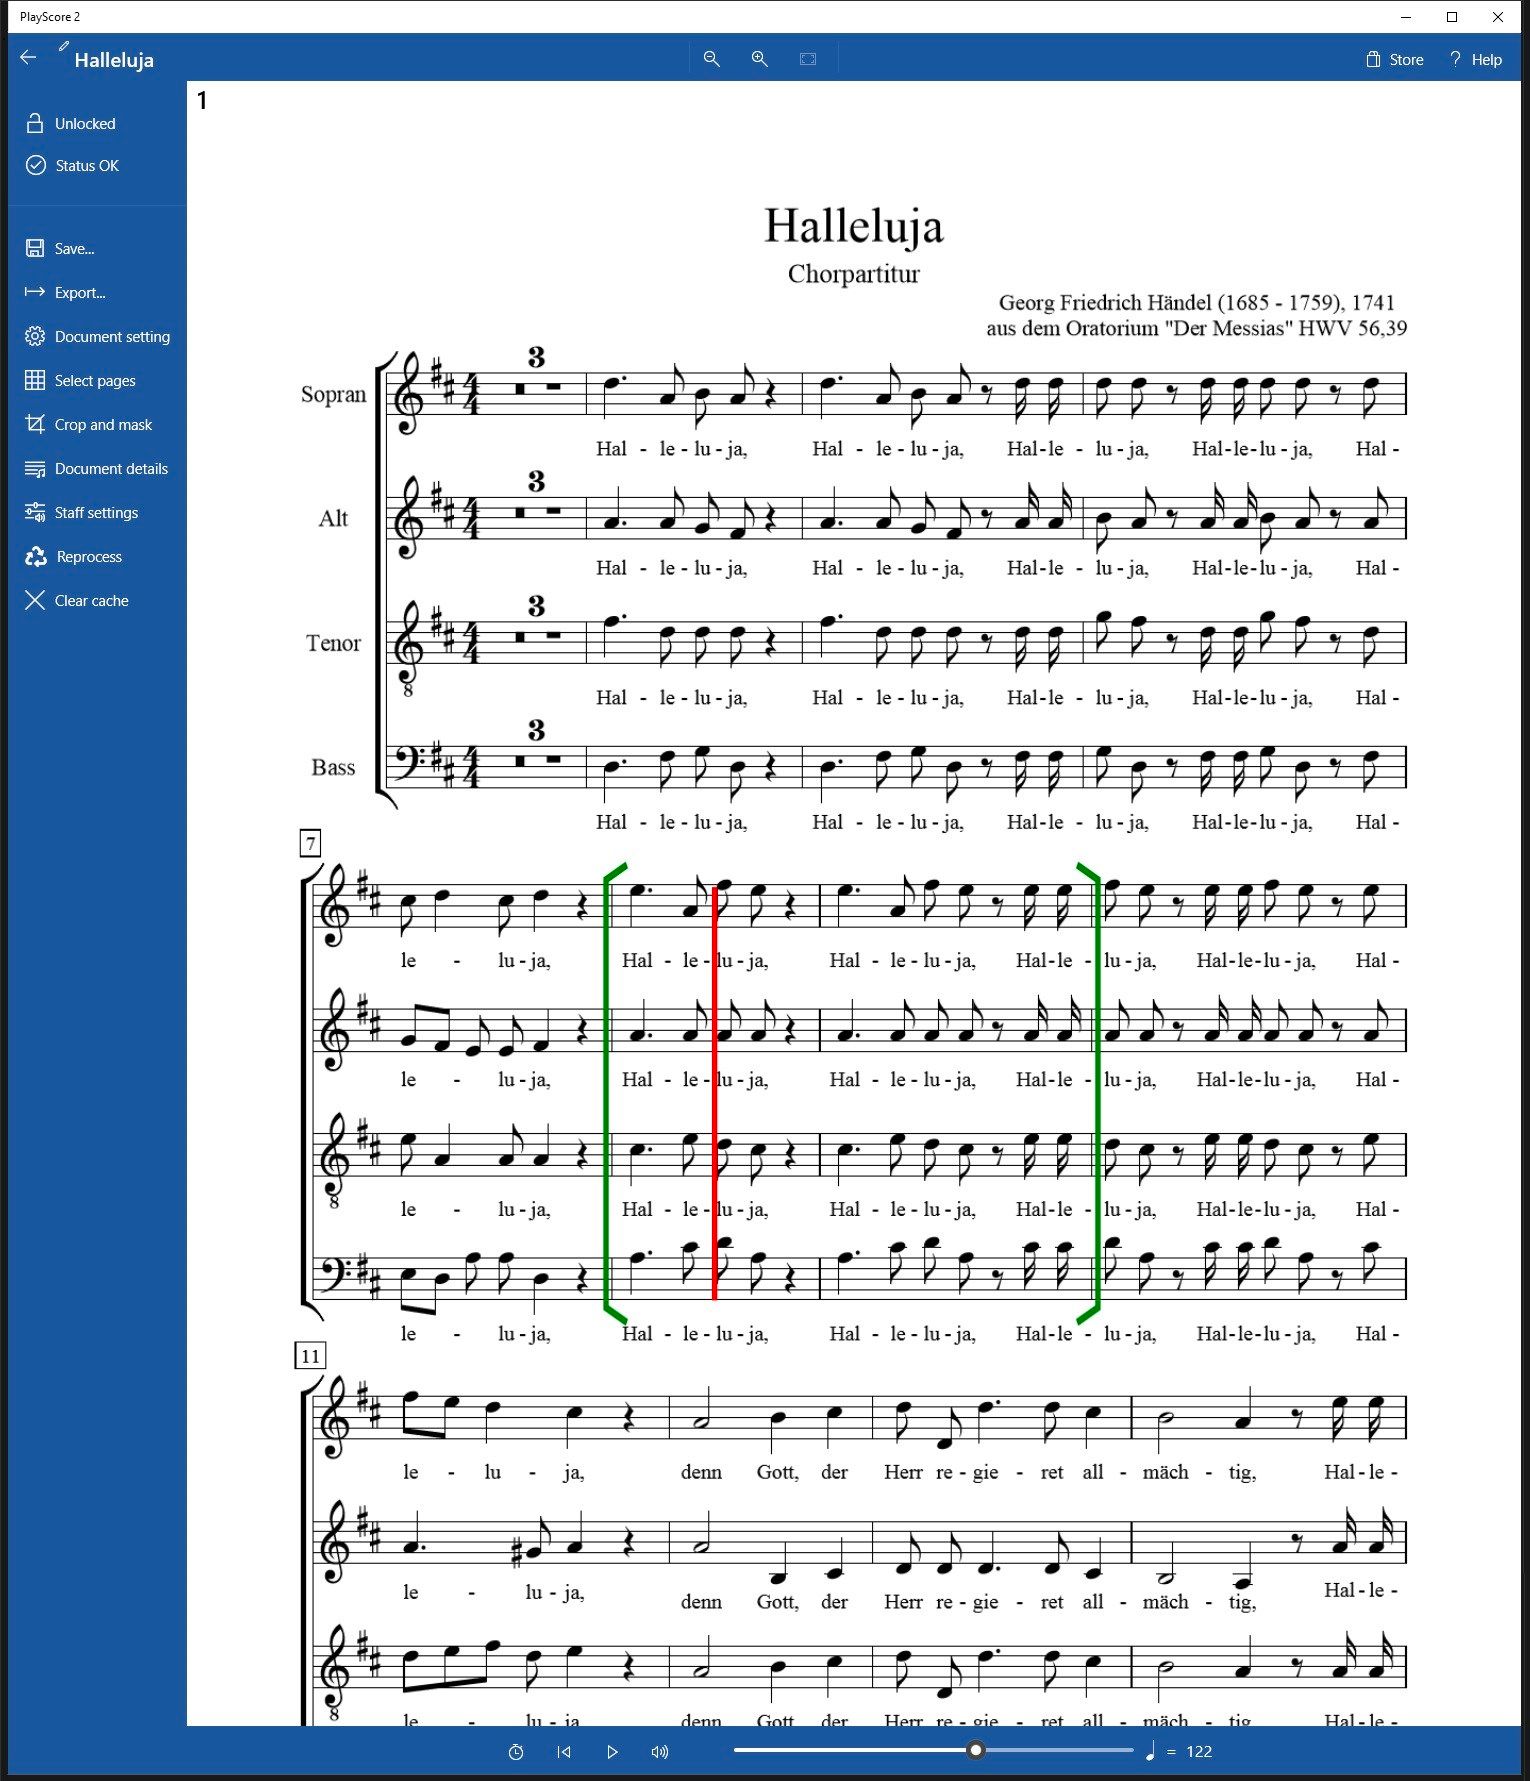 Play a PDF score from any measure